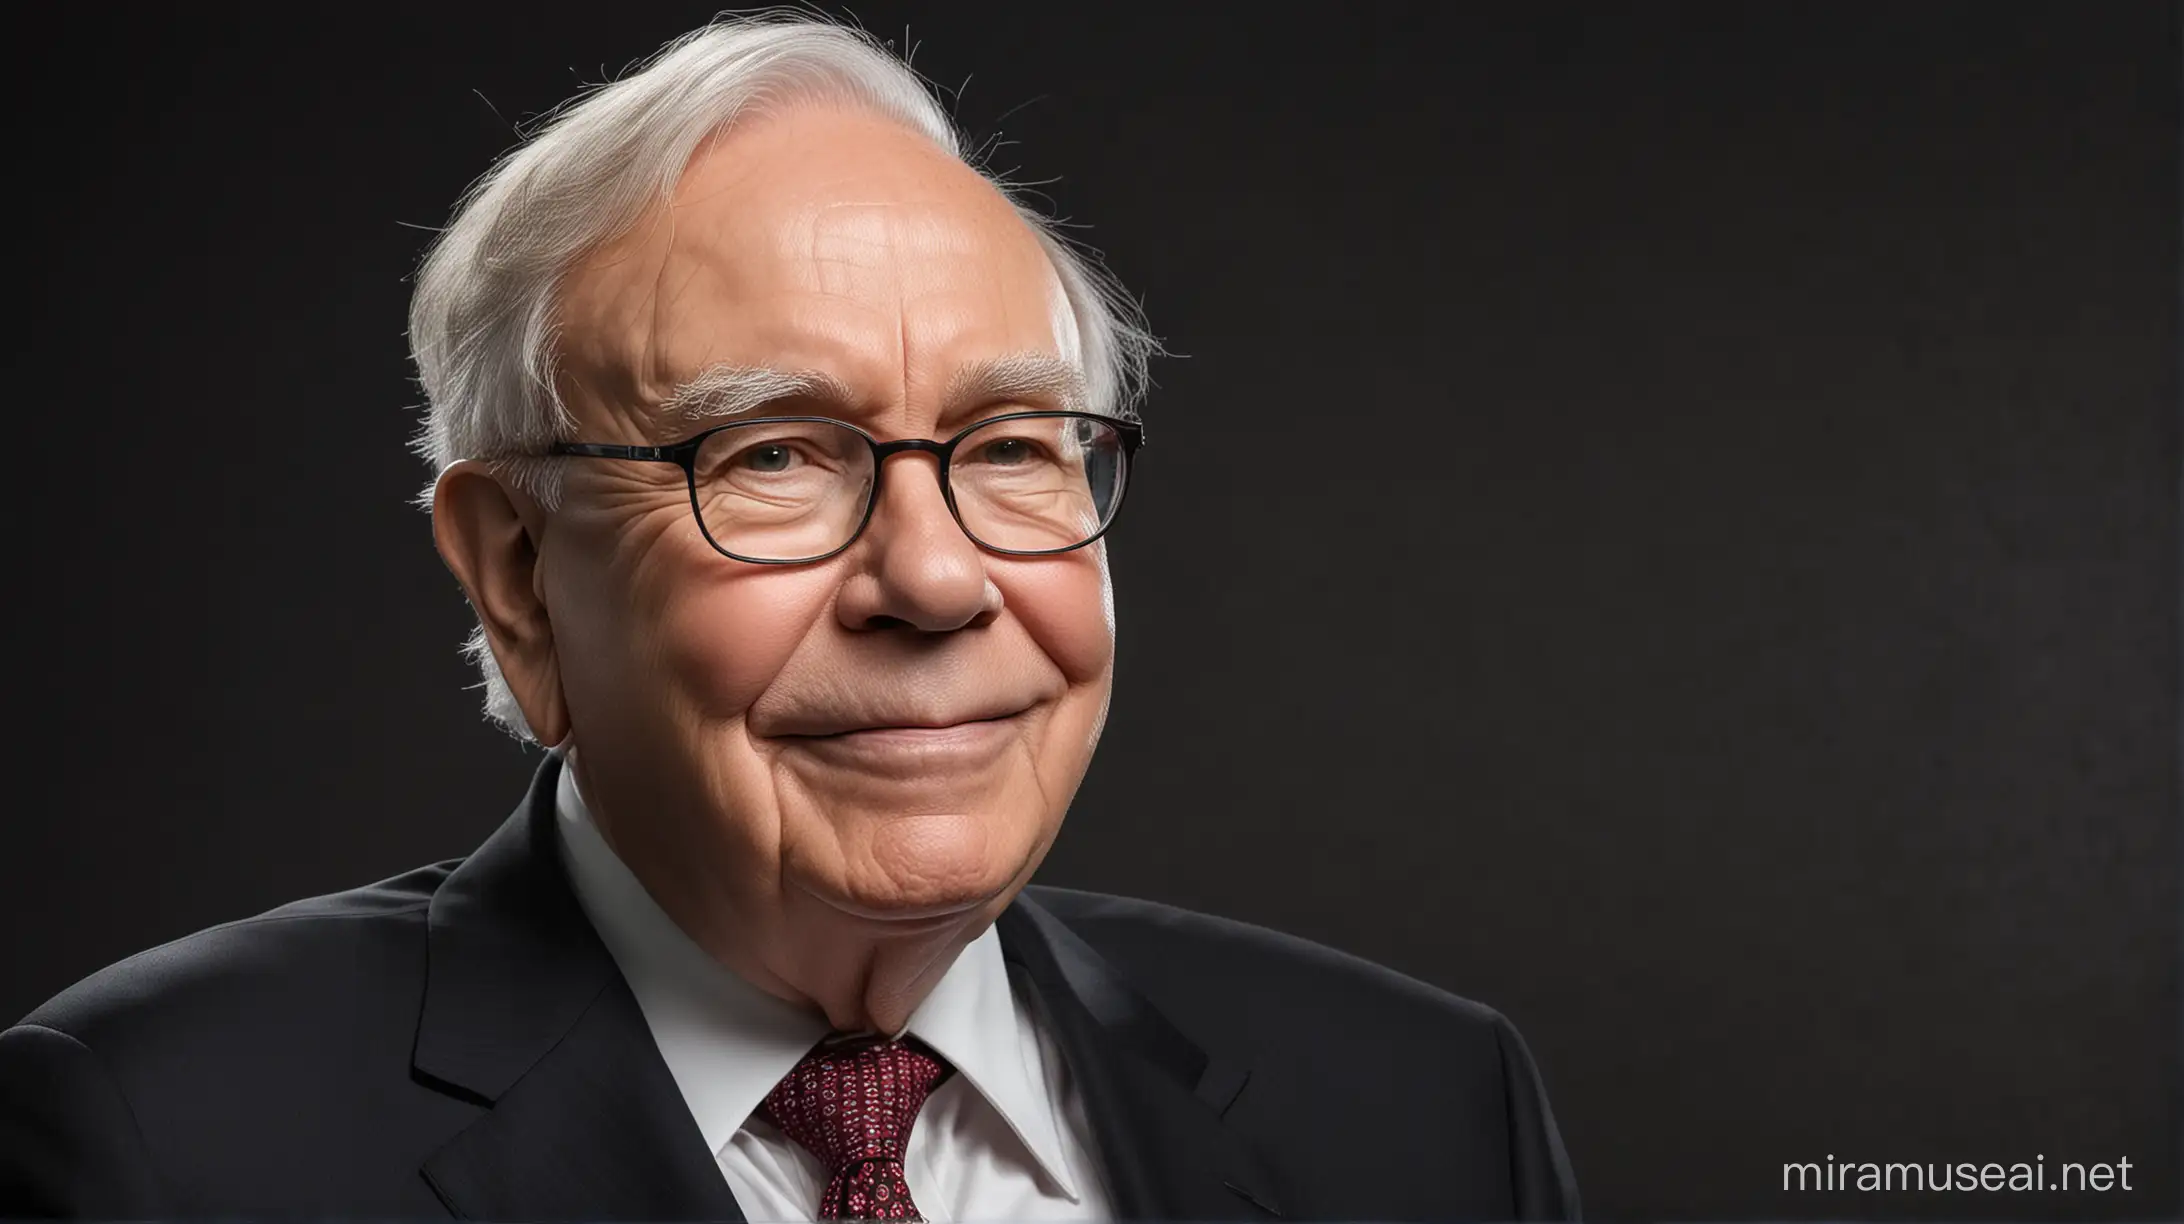 Warren Buffett and with black colour in background